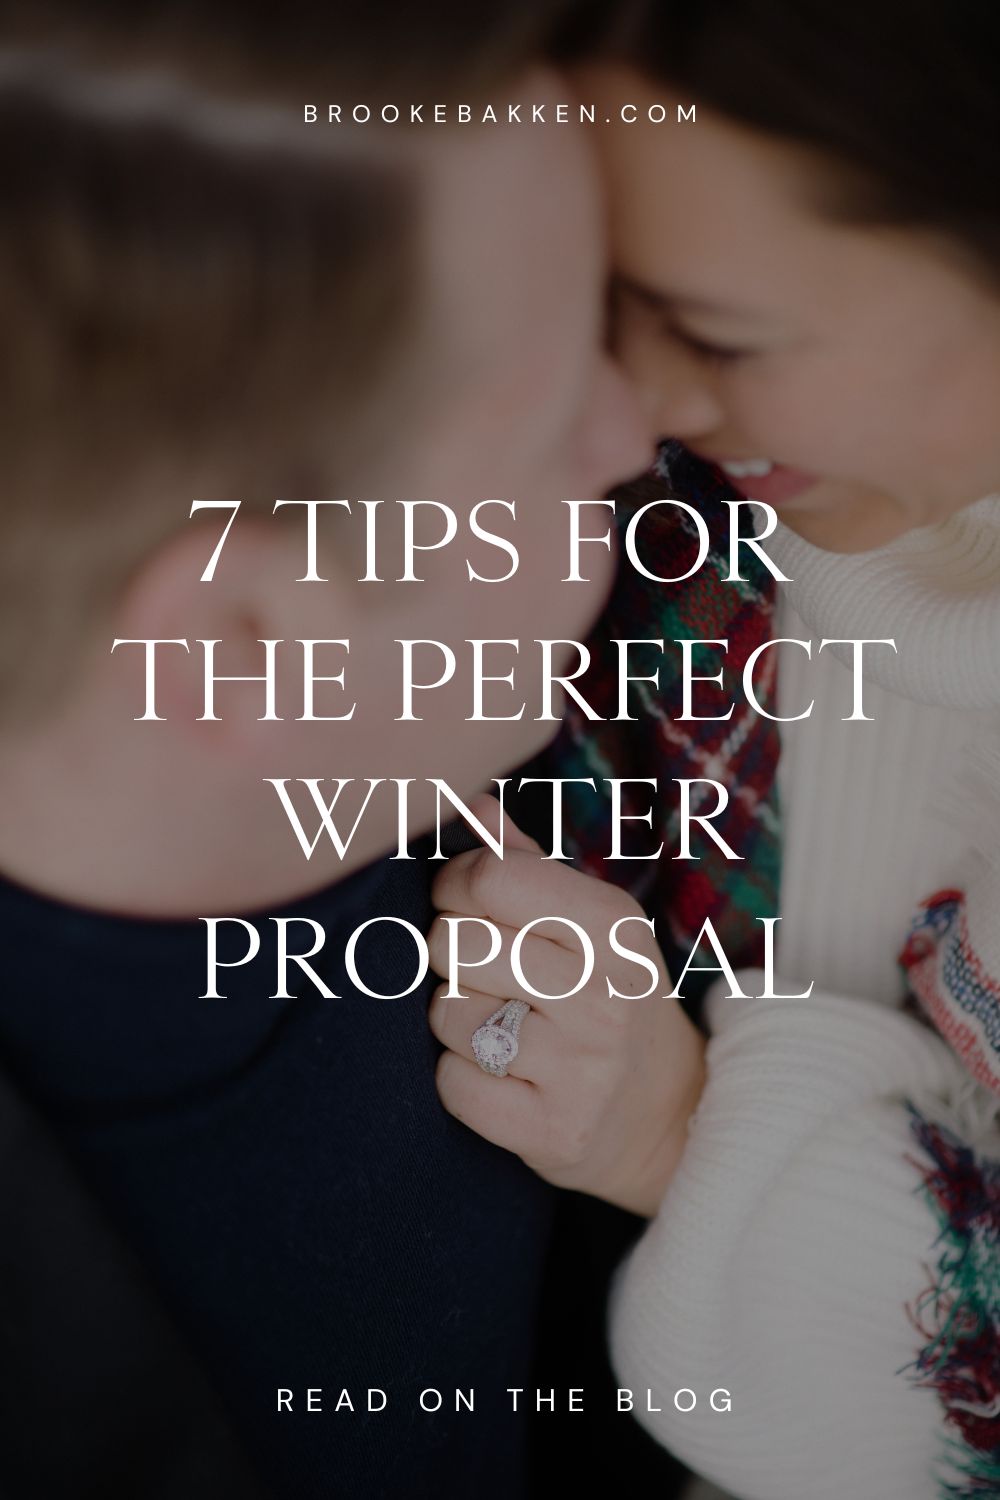 Tips for a perfect winter proposal